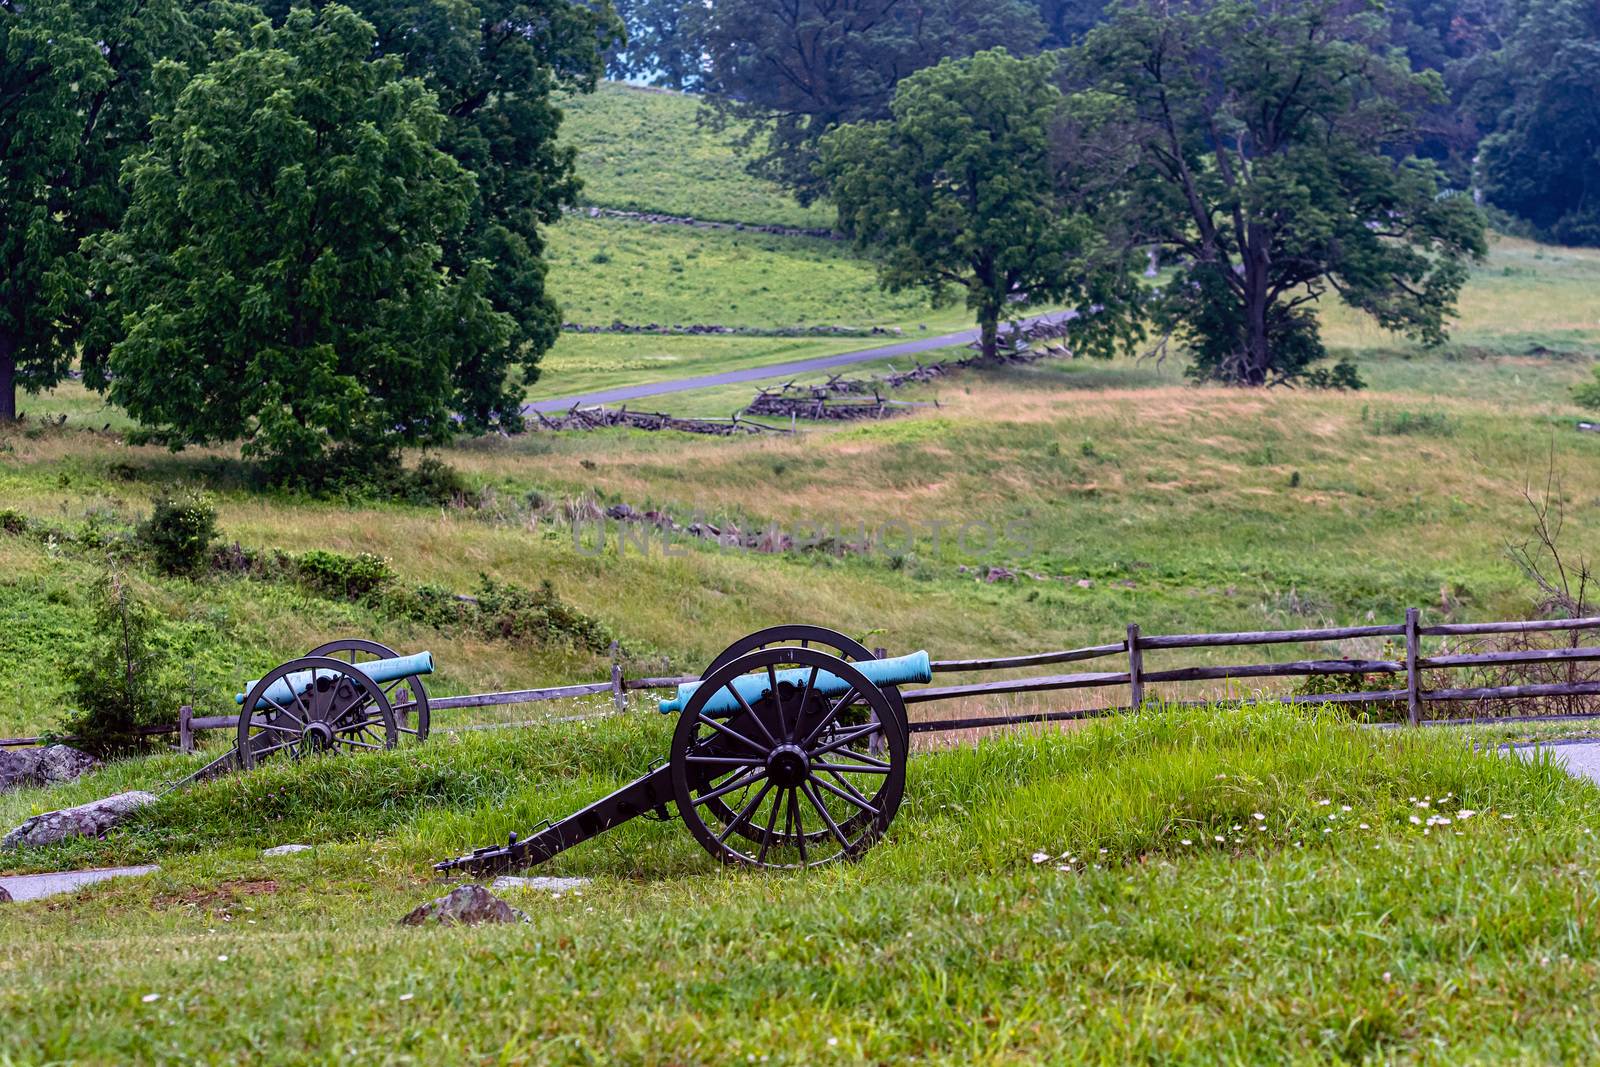 A civil war canon on the Gettysburg National Military Park, Gettysburg, PA